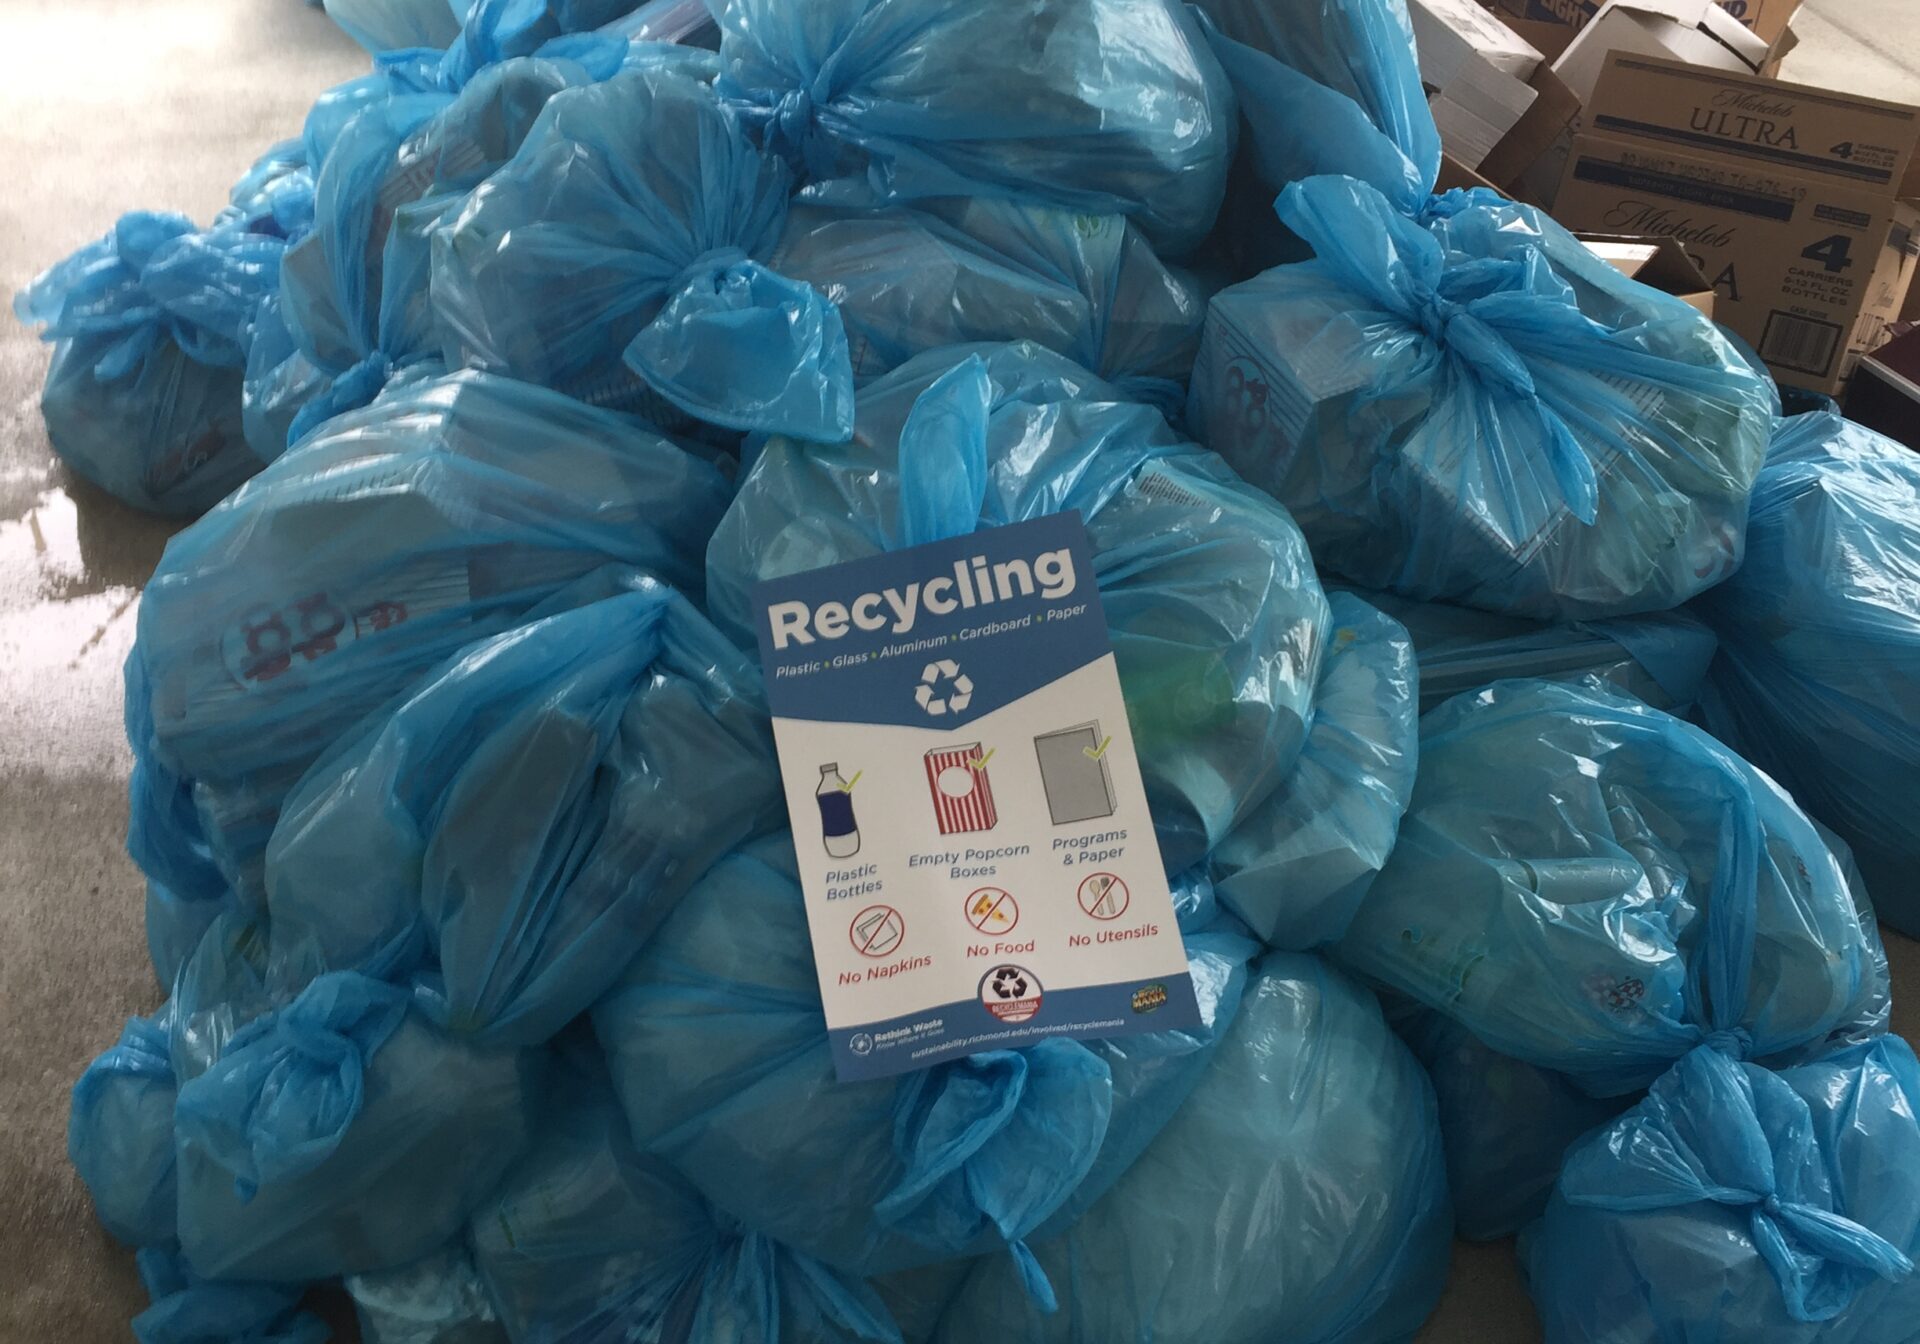 waste sort case study blue bags recycling